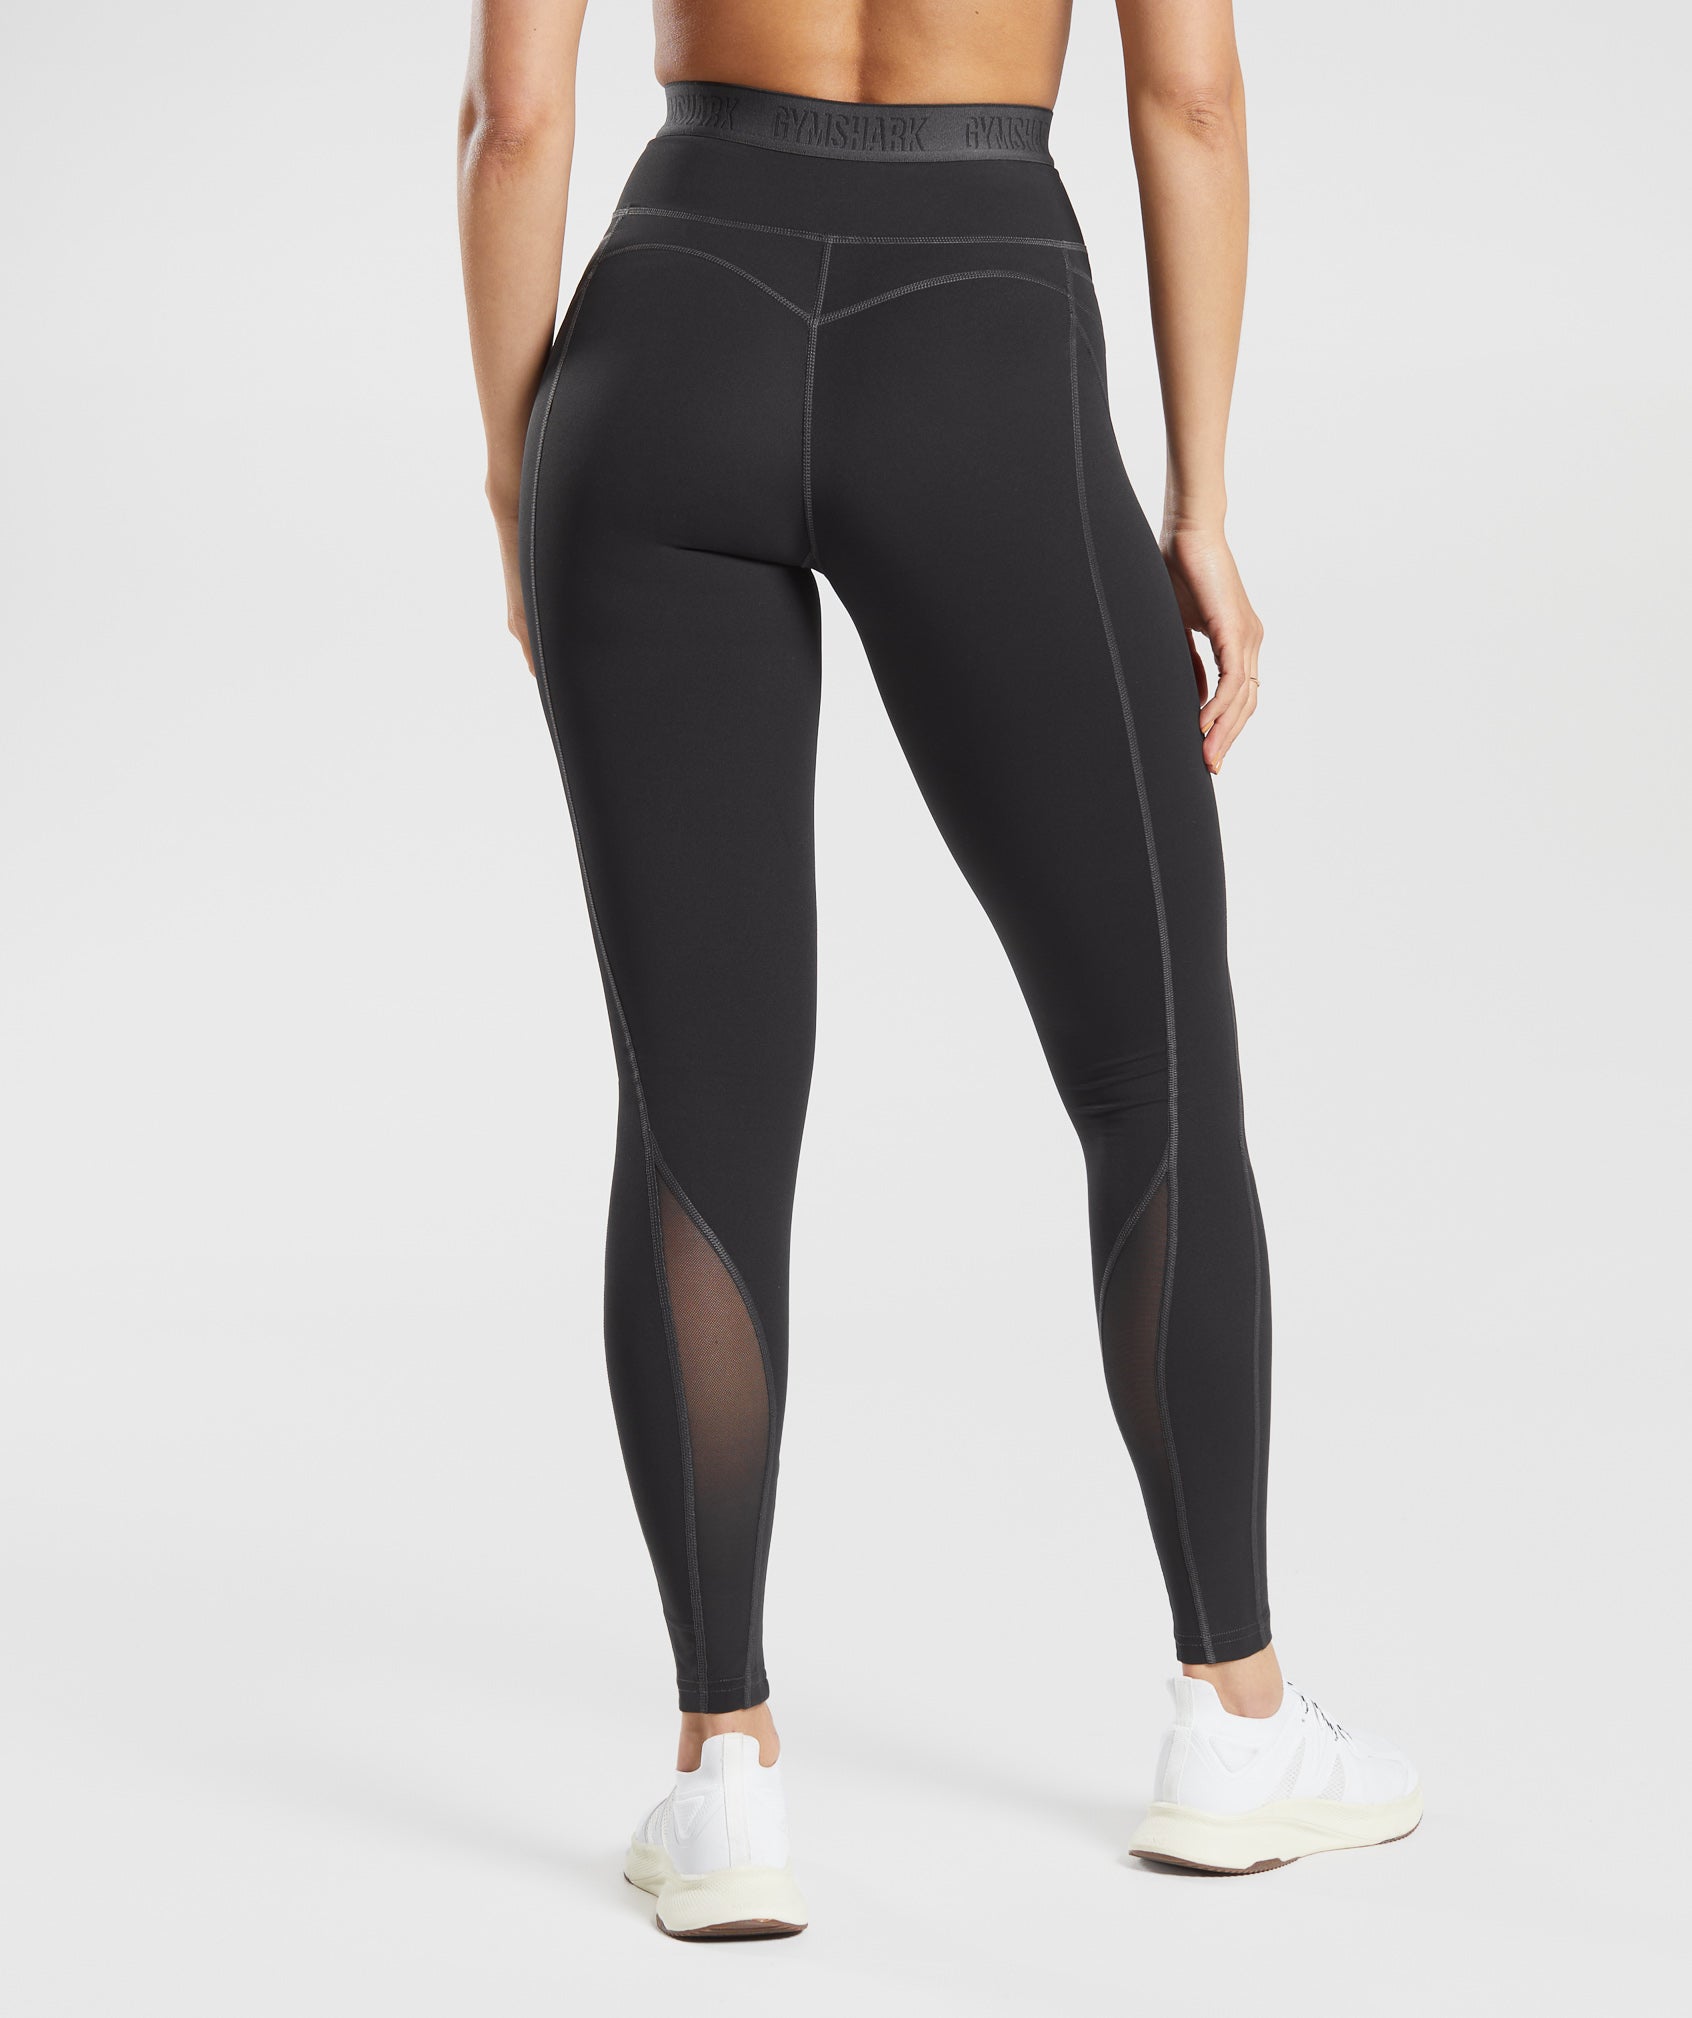 Coverup Magic- Leggings for Working Out – Kymsportwear